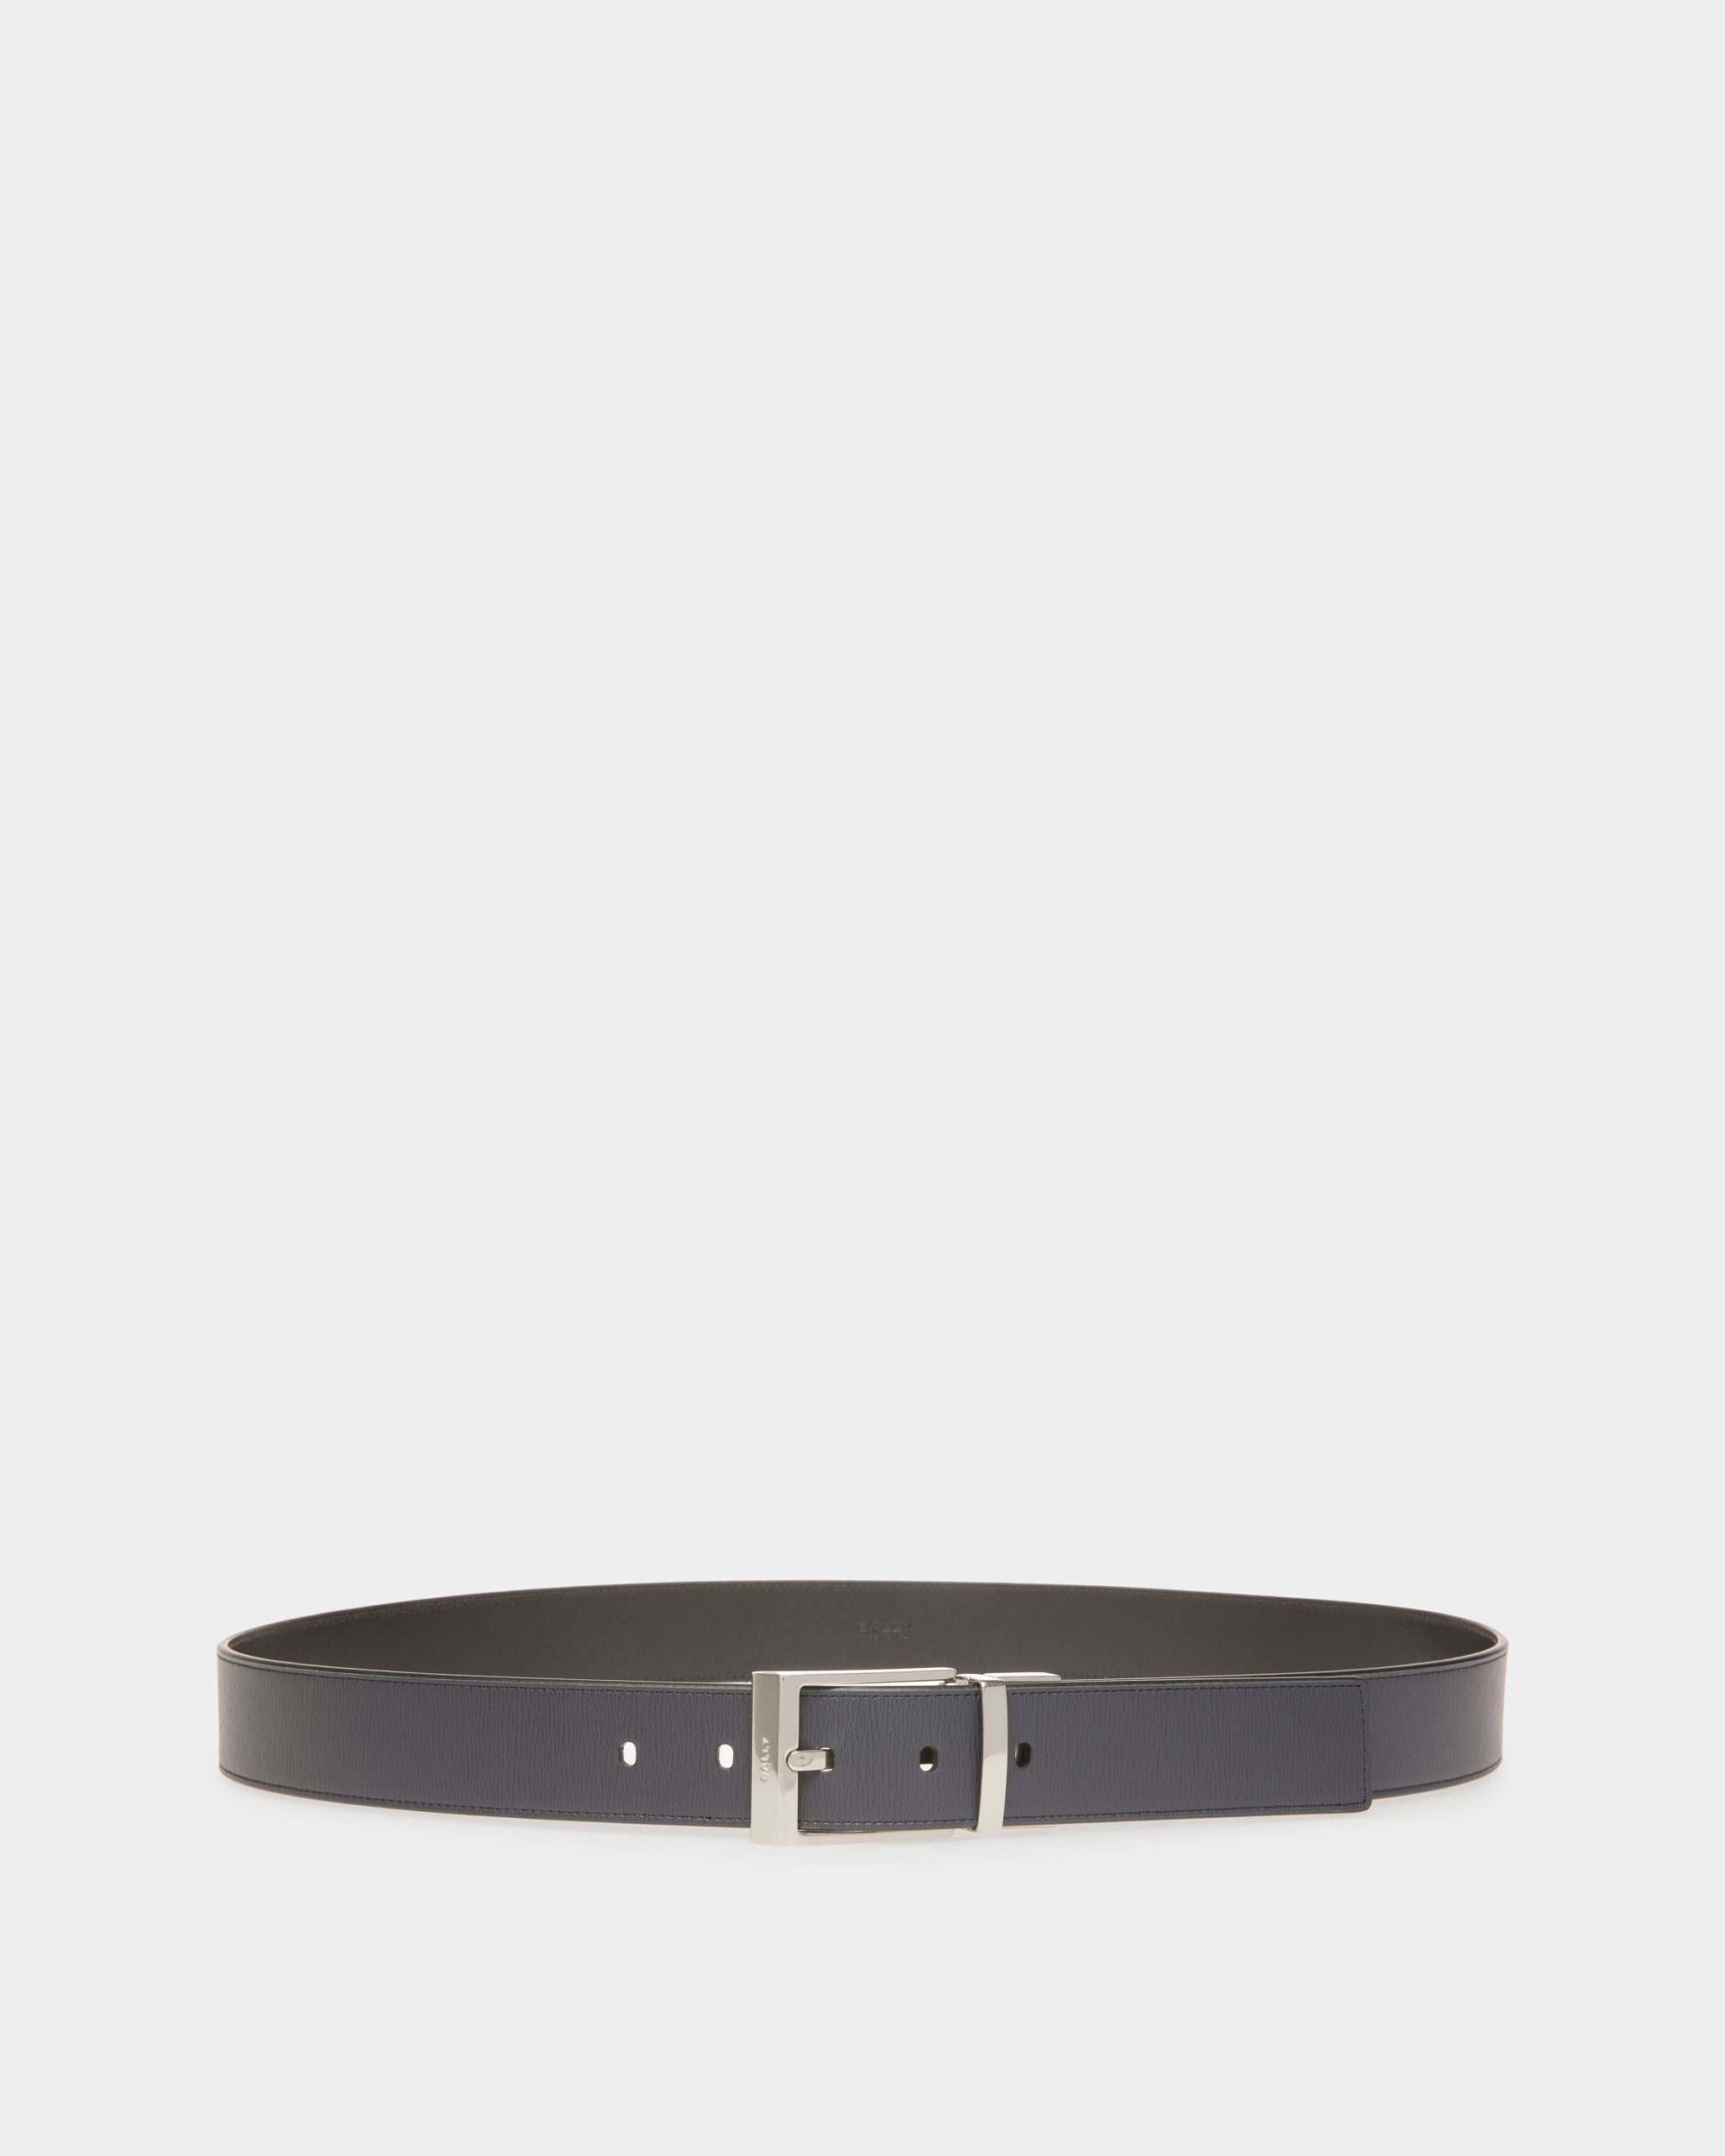 Shiffie 35 | Men's Adjustable And Reversible Belt | Midnight Leather | Bally | Still Life Front